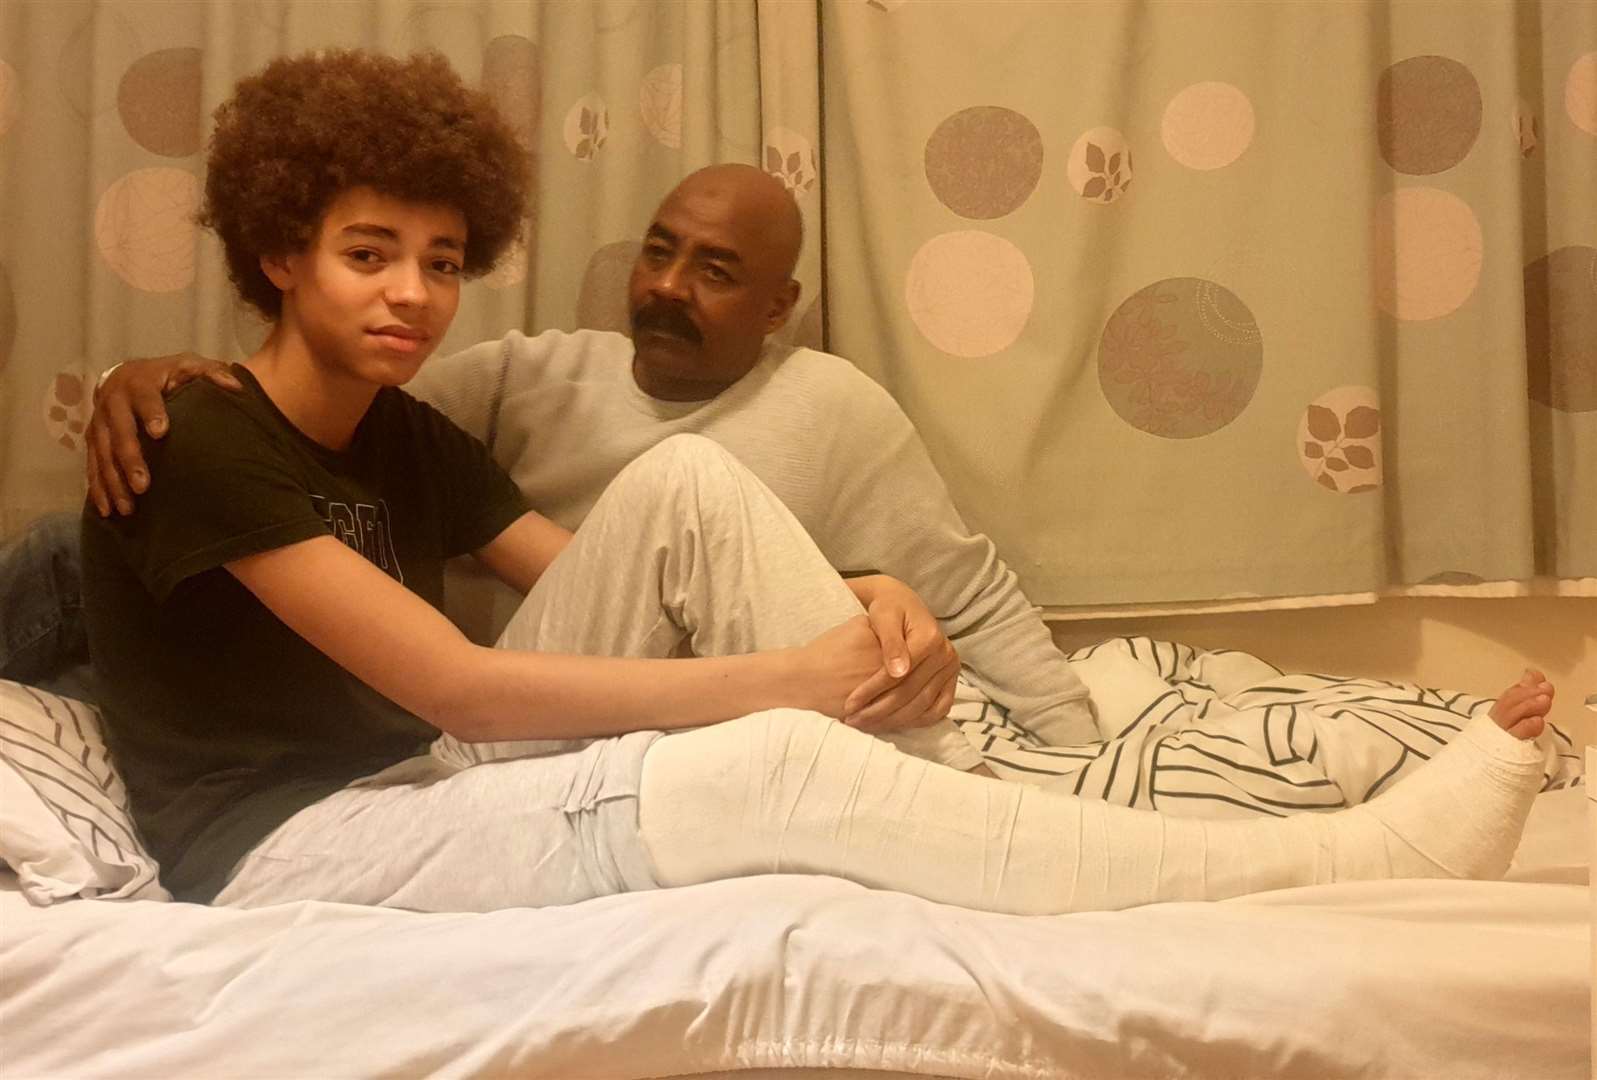 Noh Alnour recovering at home with his dad, Aemir